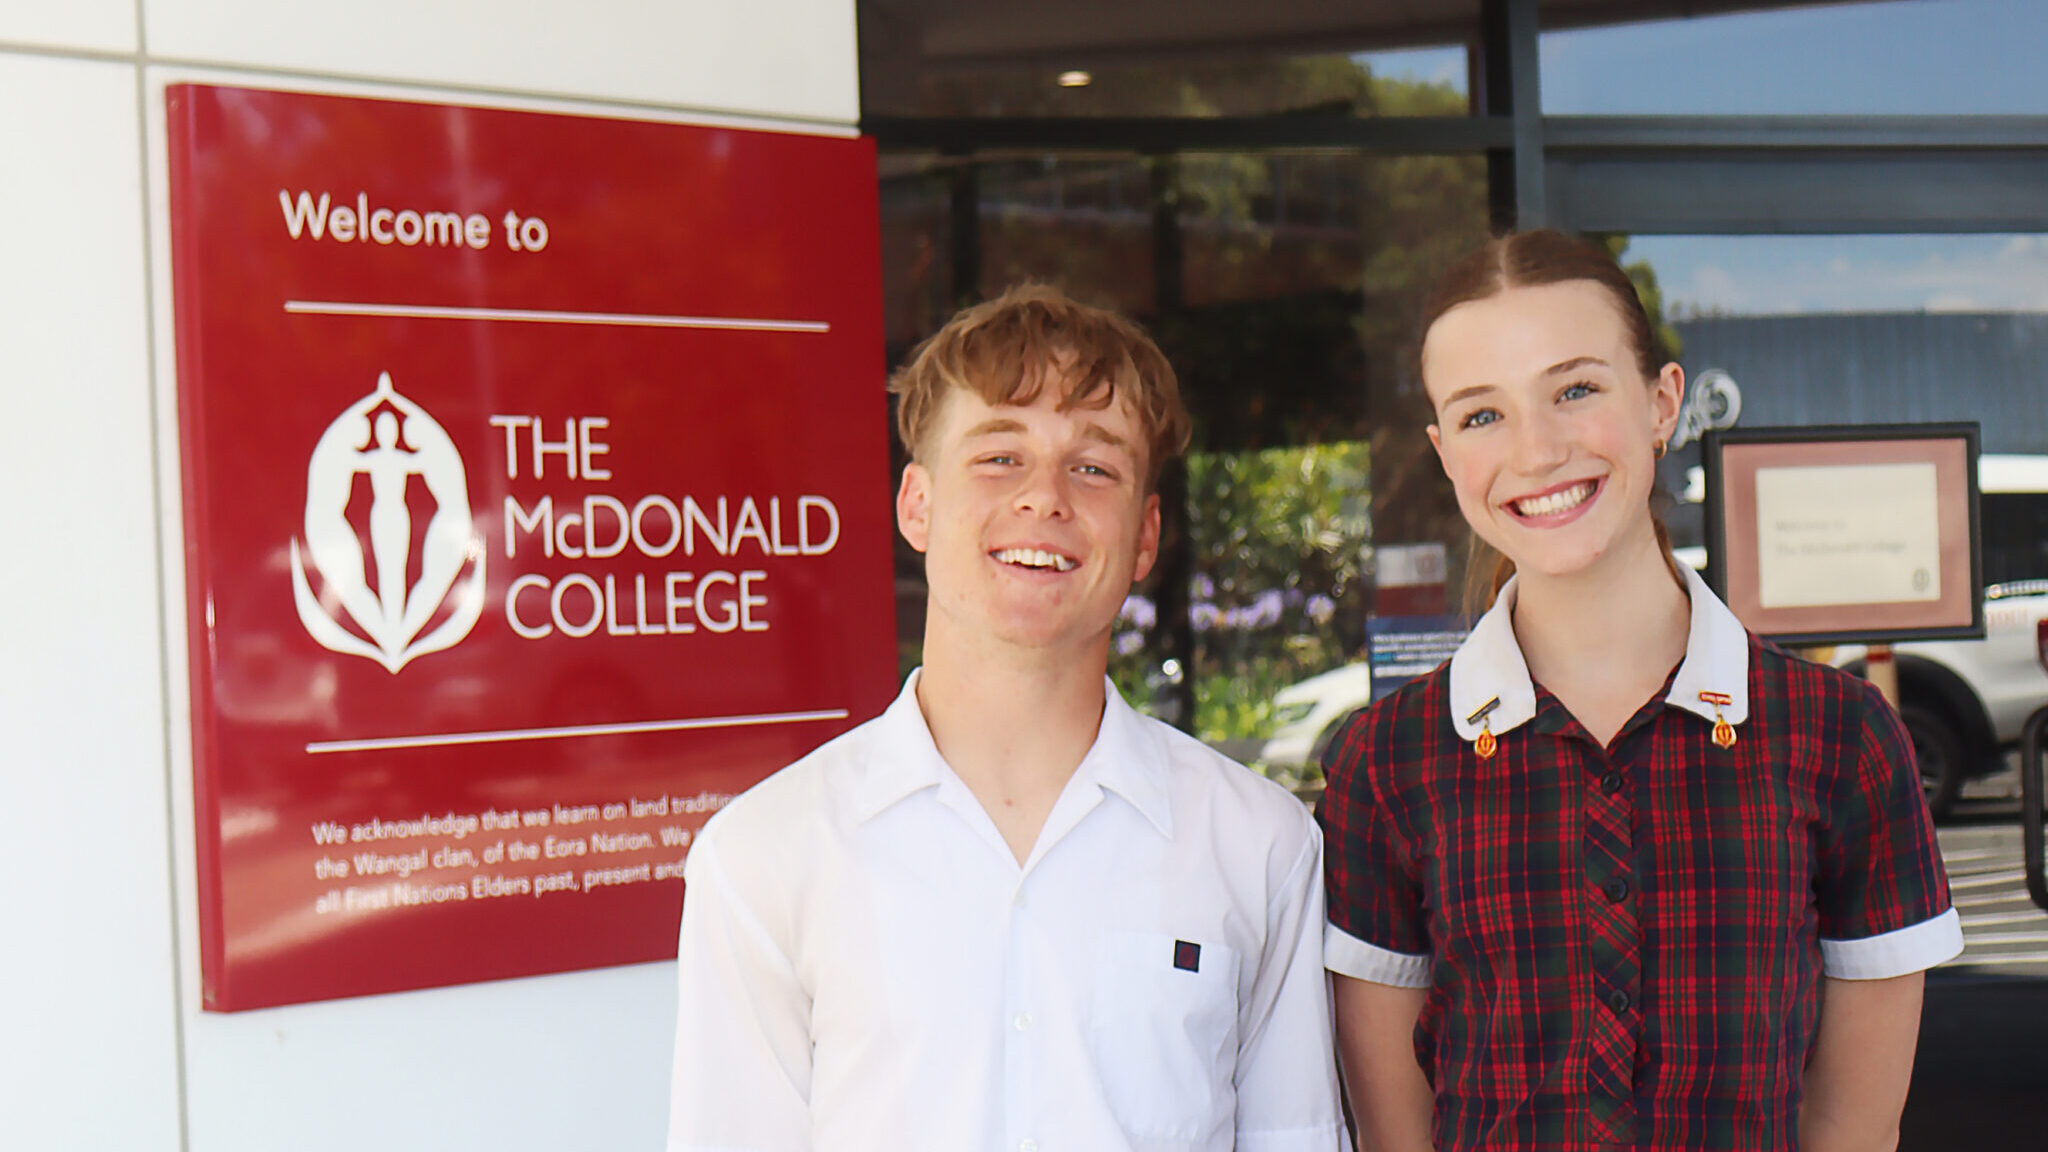 The McDonald College school captains and boarding house members